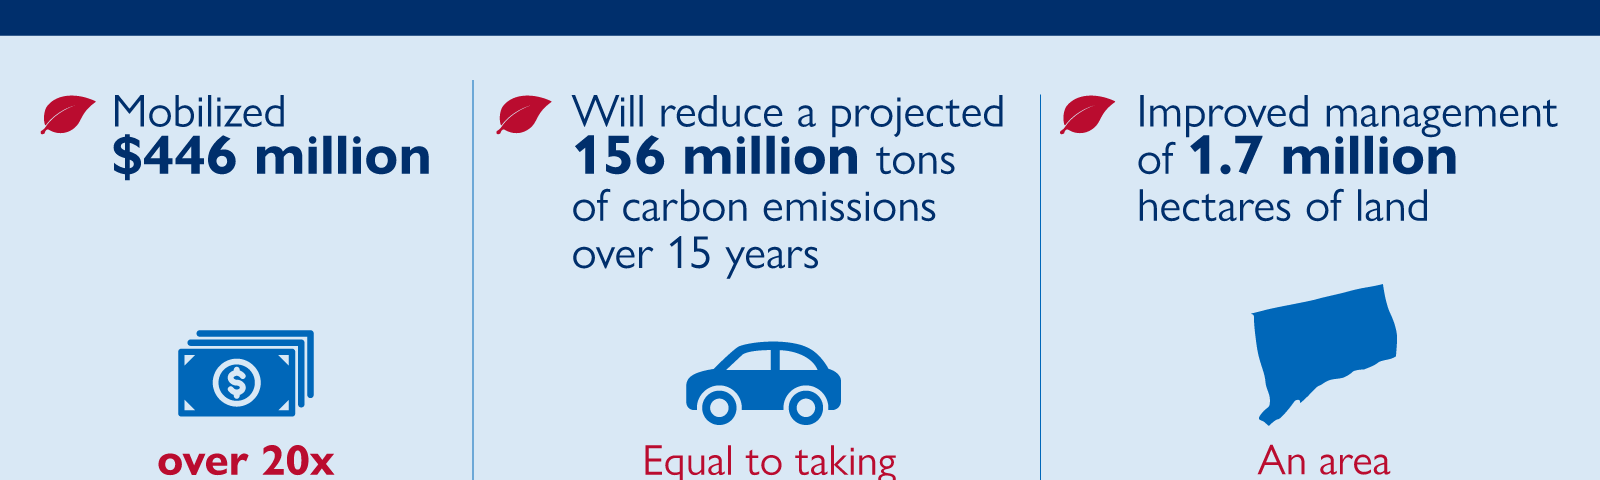 A graphic that outlines the impact of USAID Green Invest Asia, including $446 million mobilized, 156 million tons of carbon emissions reduced, and 1.7 million hectares of land improved.